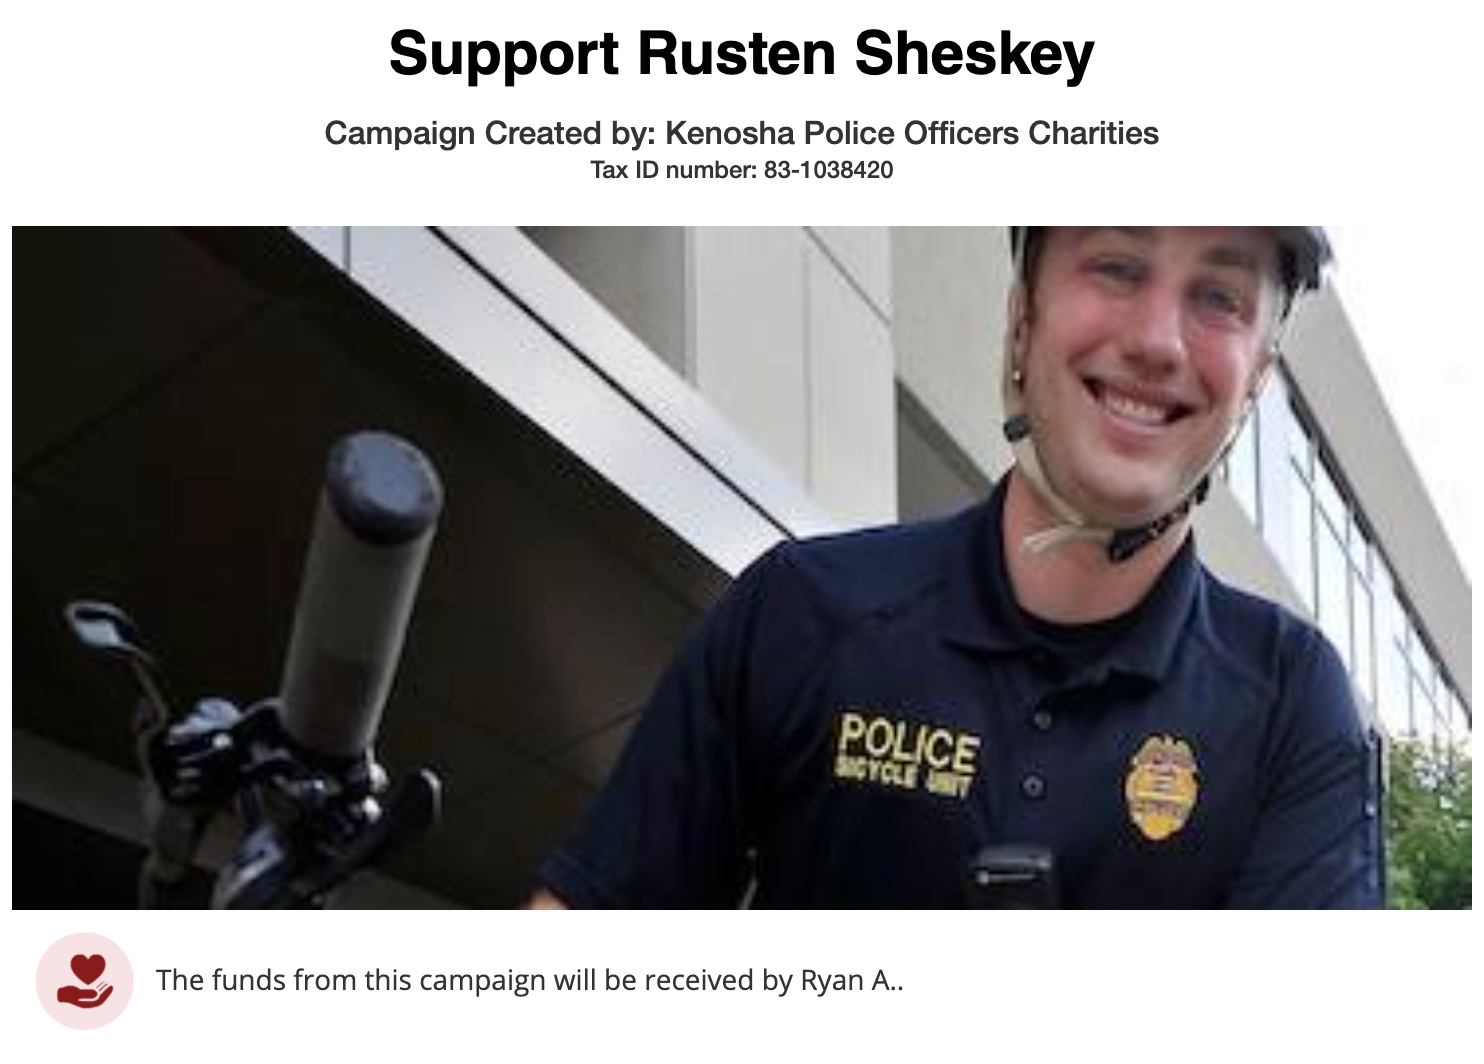 A screenshot from the "Support Rusten Sheskey" fundraiser on the Christian site GiveSendGo